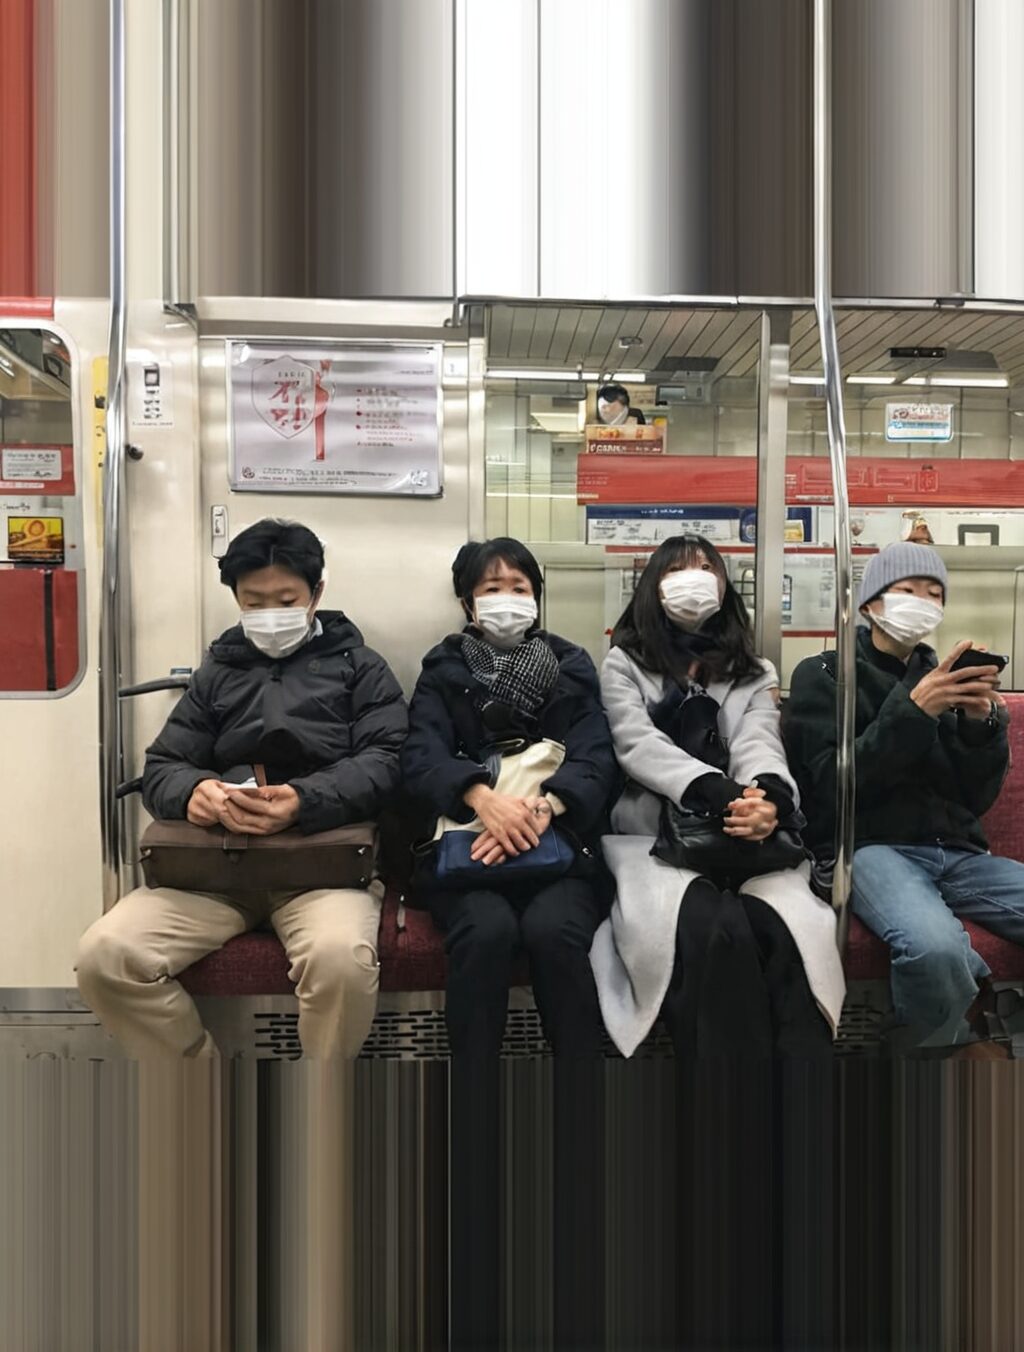 why do they still wear masks in japan